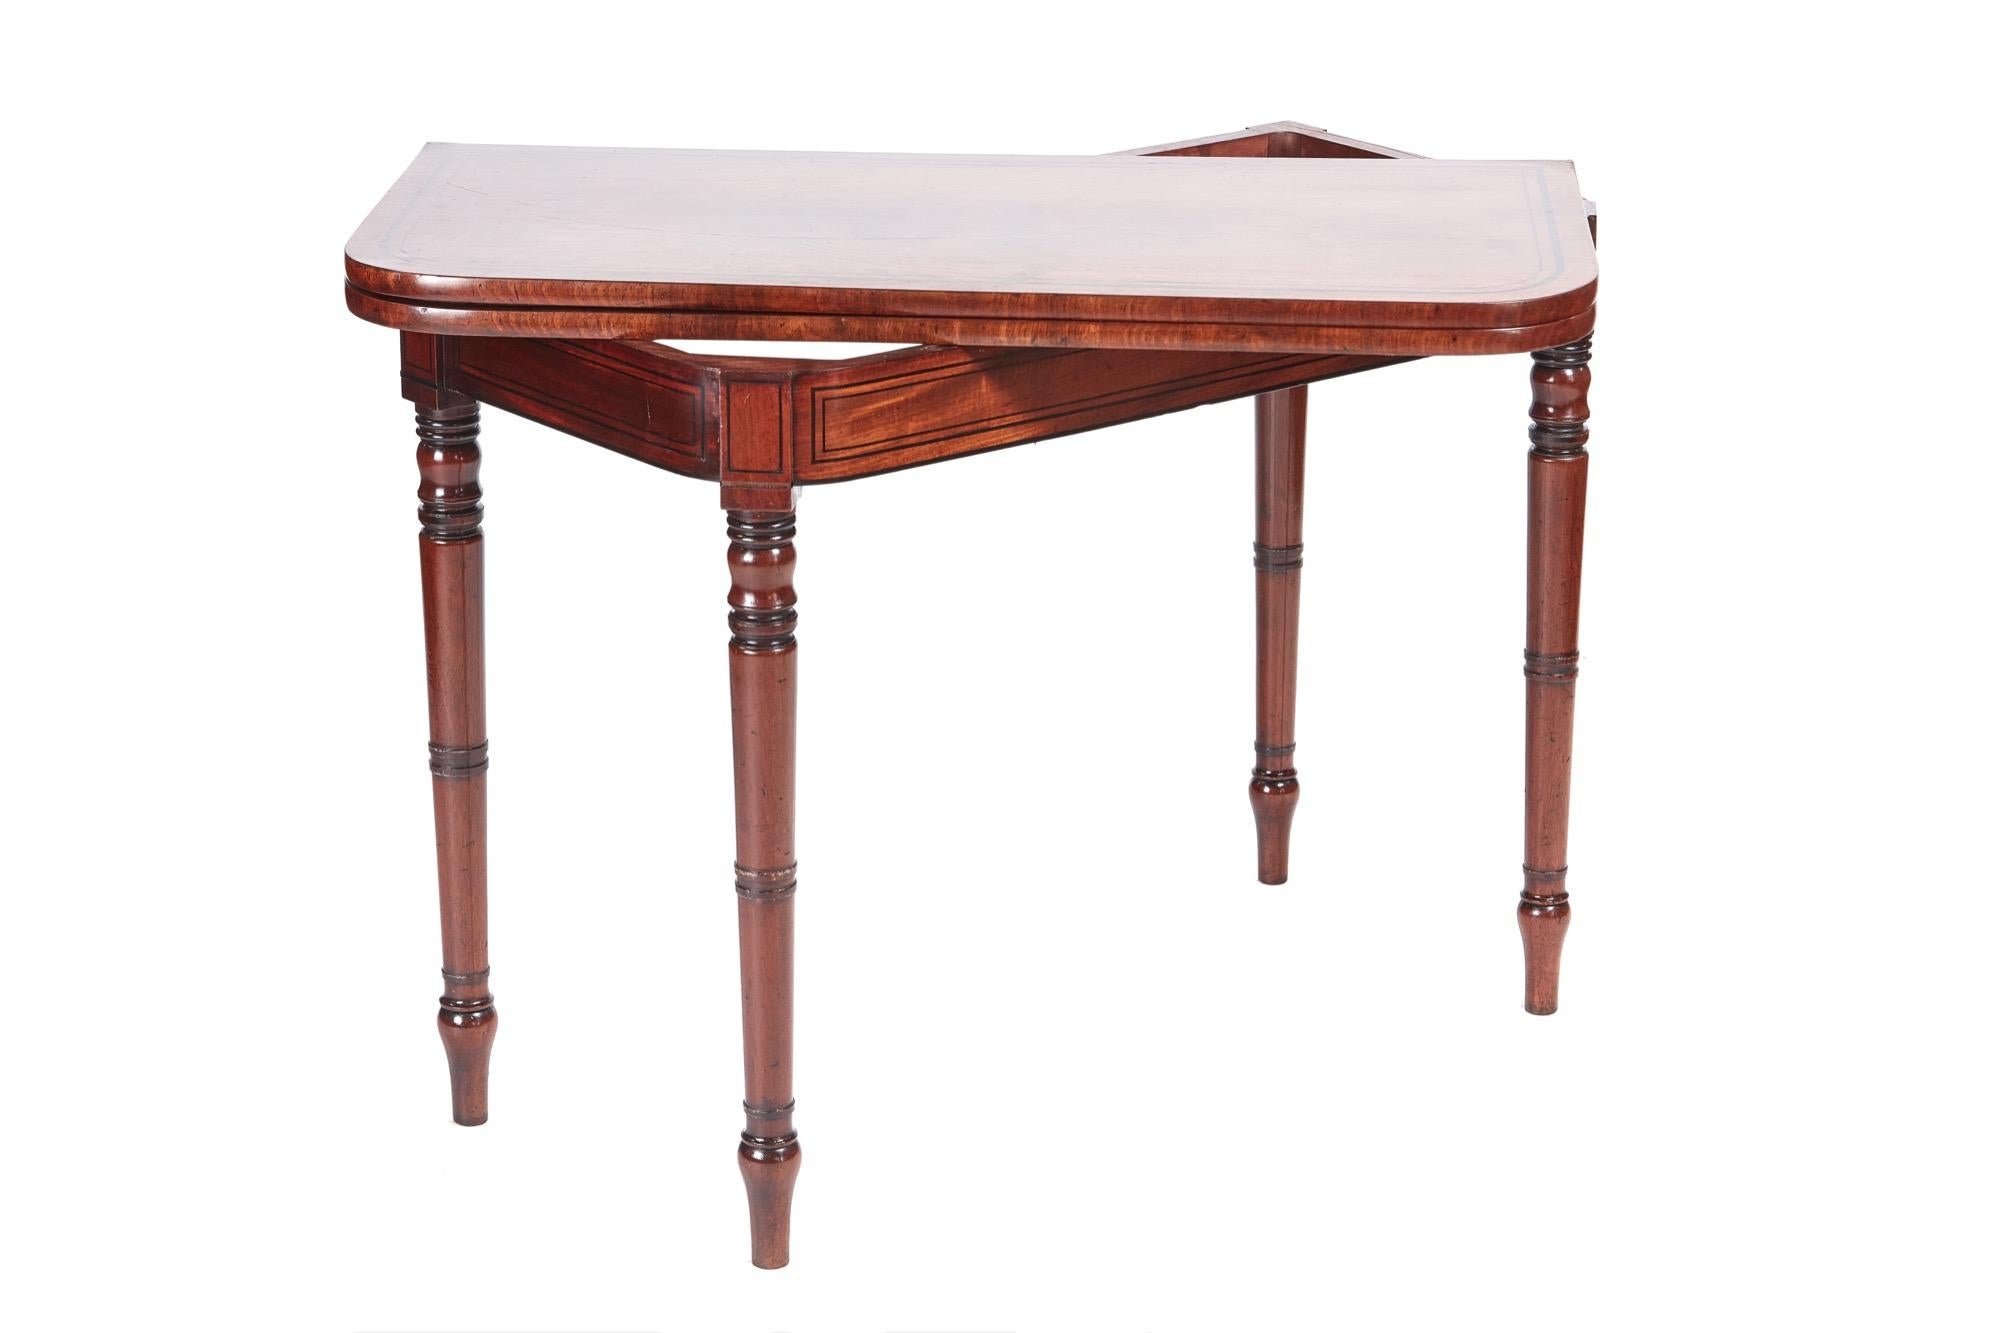 This is an antique George III antique mahogany card/side table with the loveliest inlaid mahogany top, original green baize and inlaid frieze. It stands on four elegantly turned legs.

A delightful piece in the finest condition.

WORLDWIDE